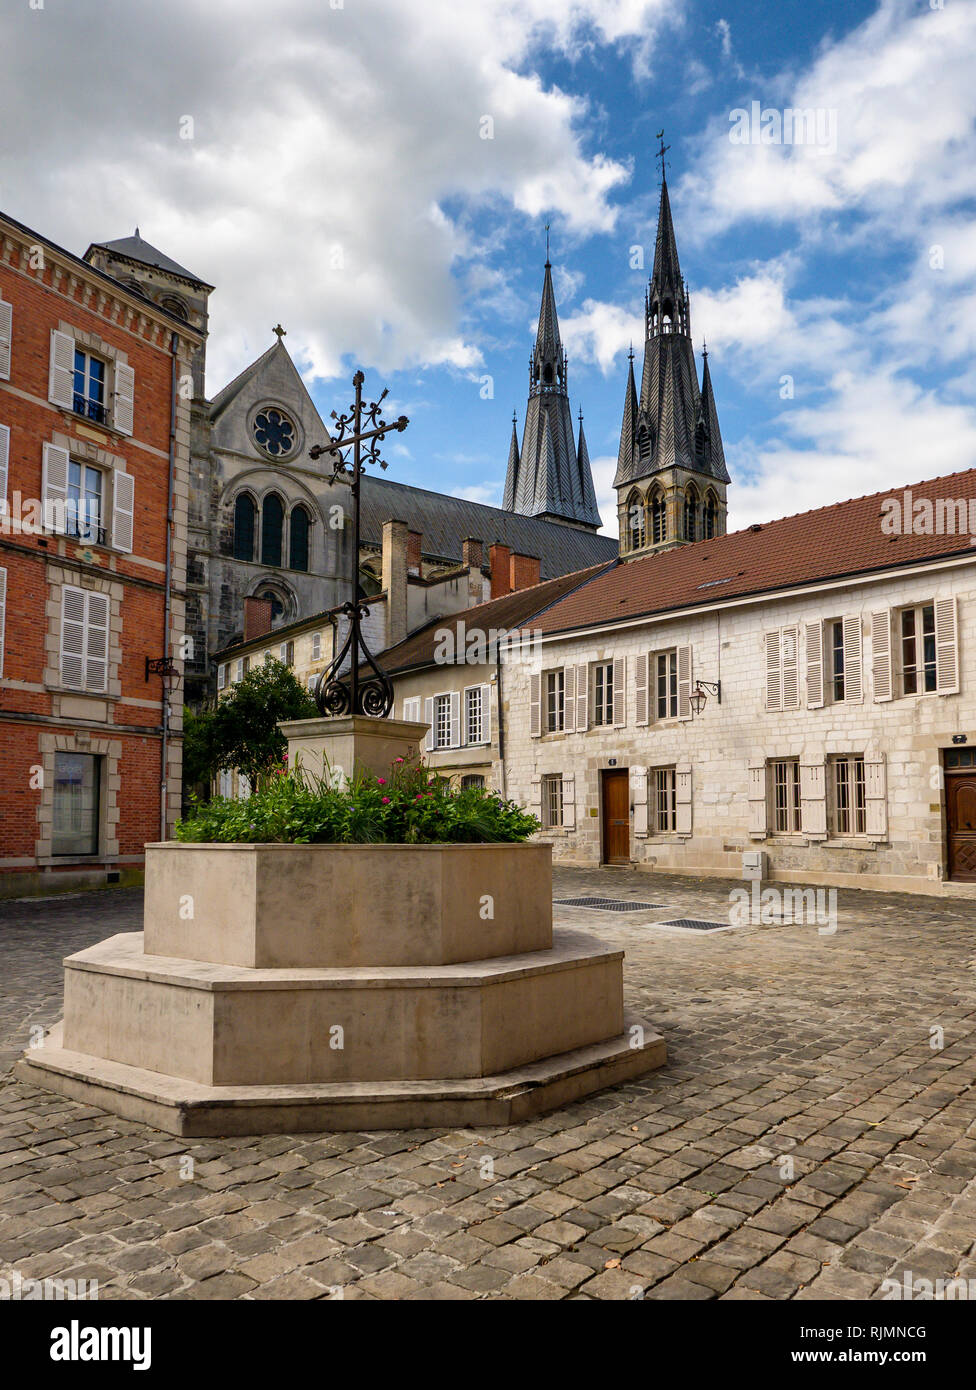 Rue du Lycée, Châlons-en-Champagne, France with a view of the Catholic Church, Collégiale Notre-Dame en Vaux. French champagne is produced here. Stock Photo